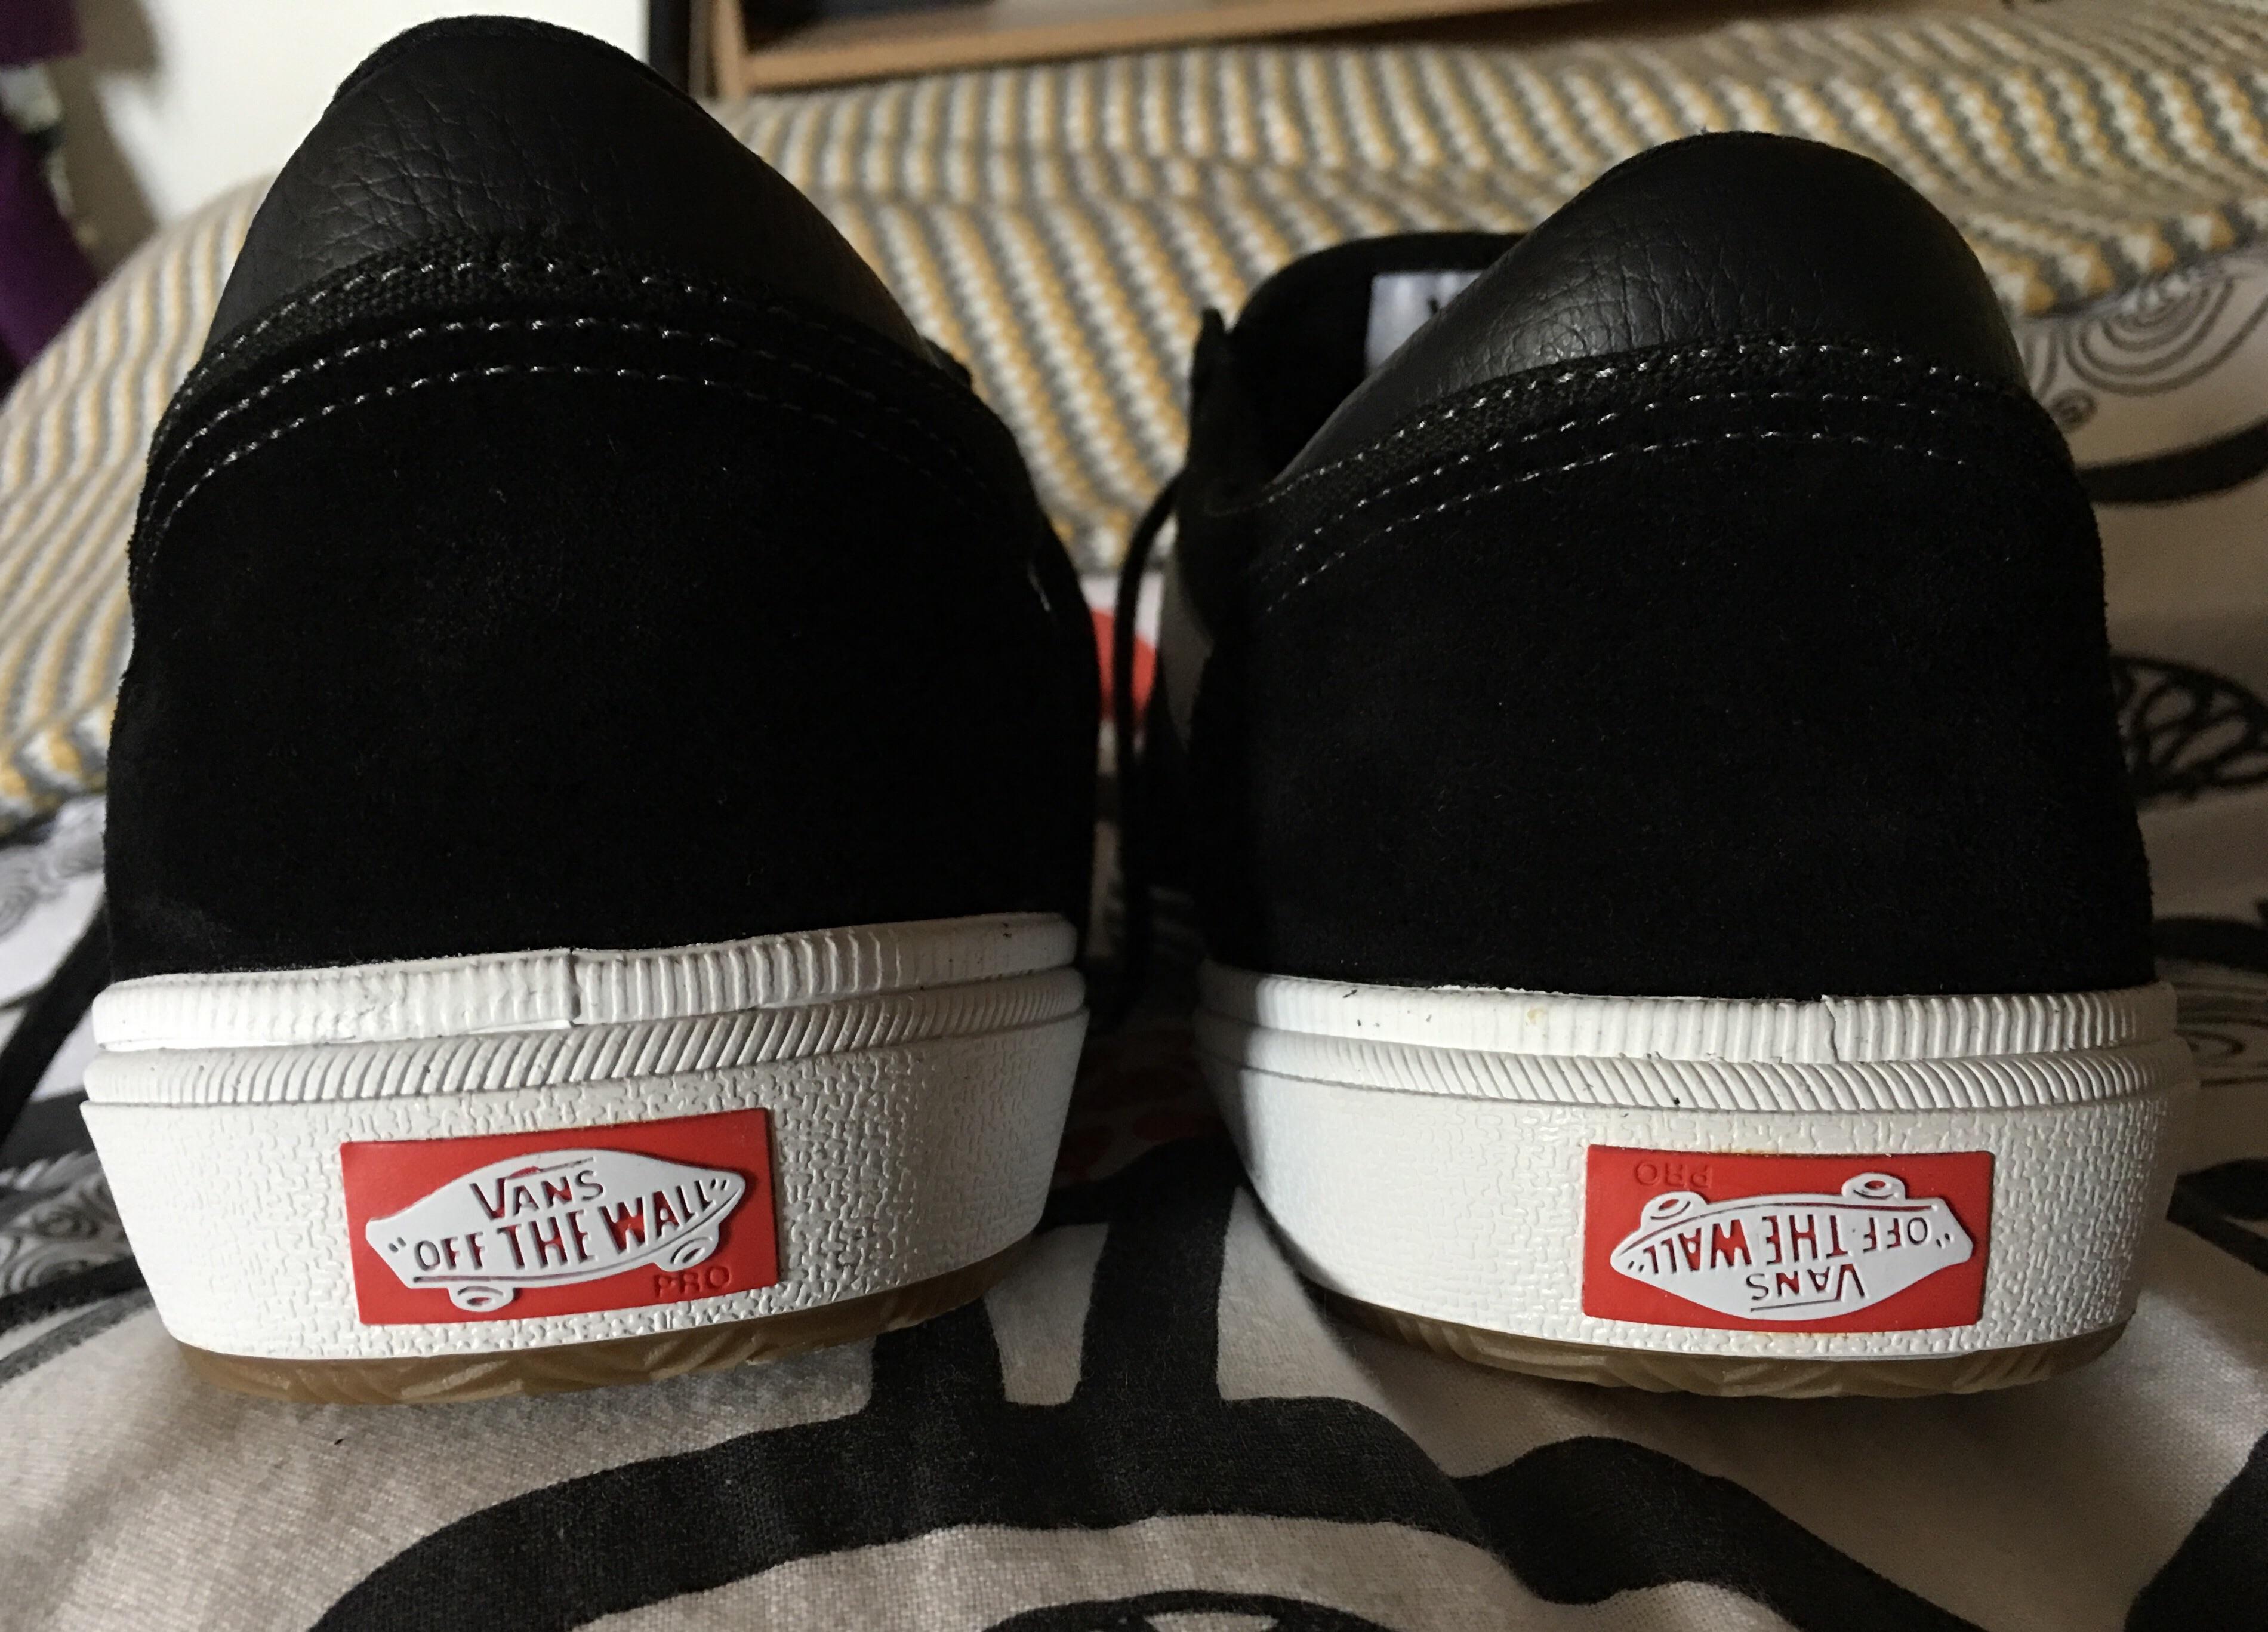 Off the Wall Vans Shoes Logo - One of my new shoes has the Vans logo upside down : mildlyinteresting